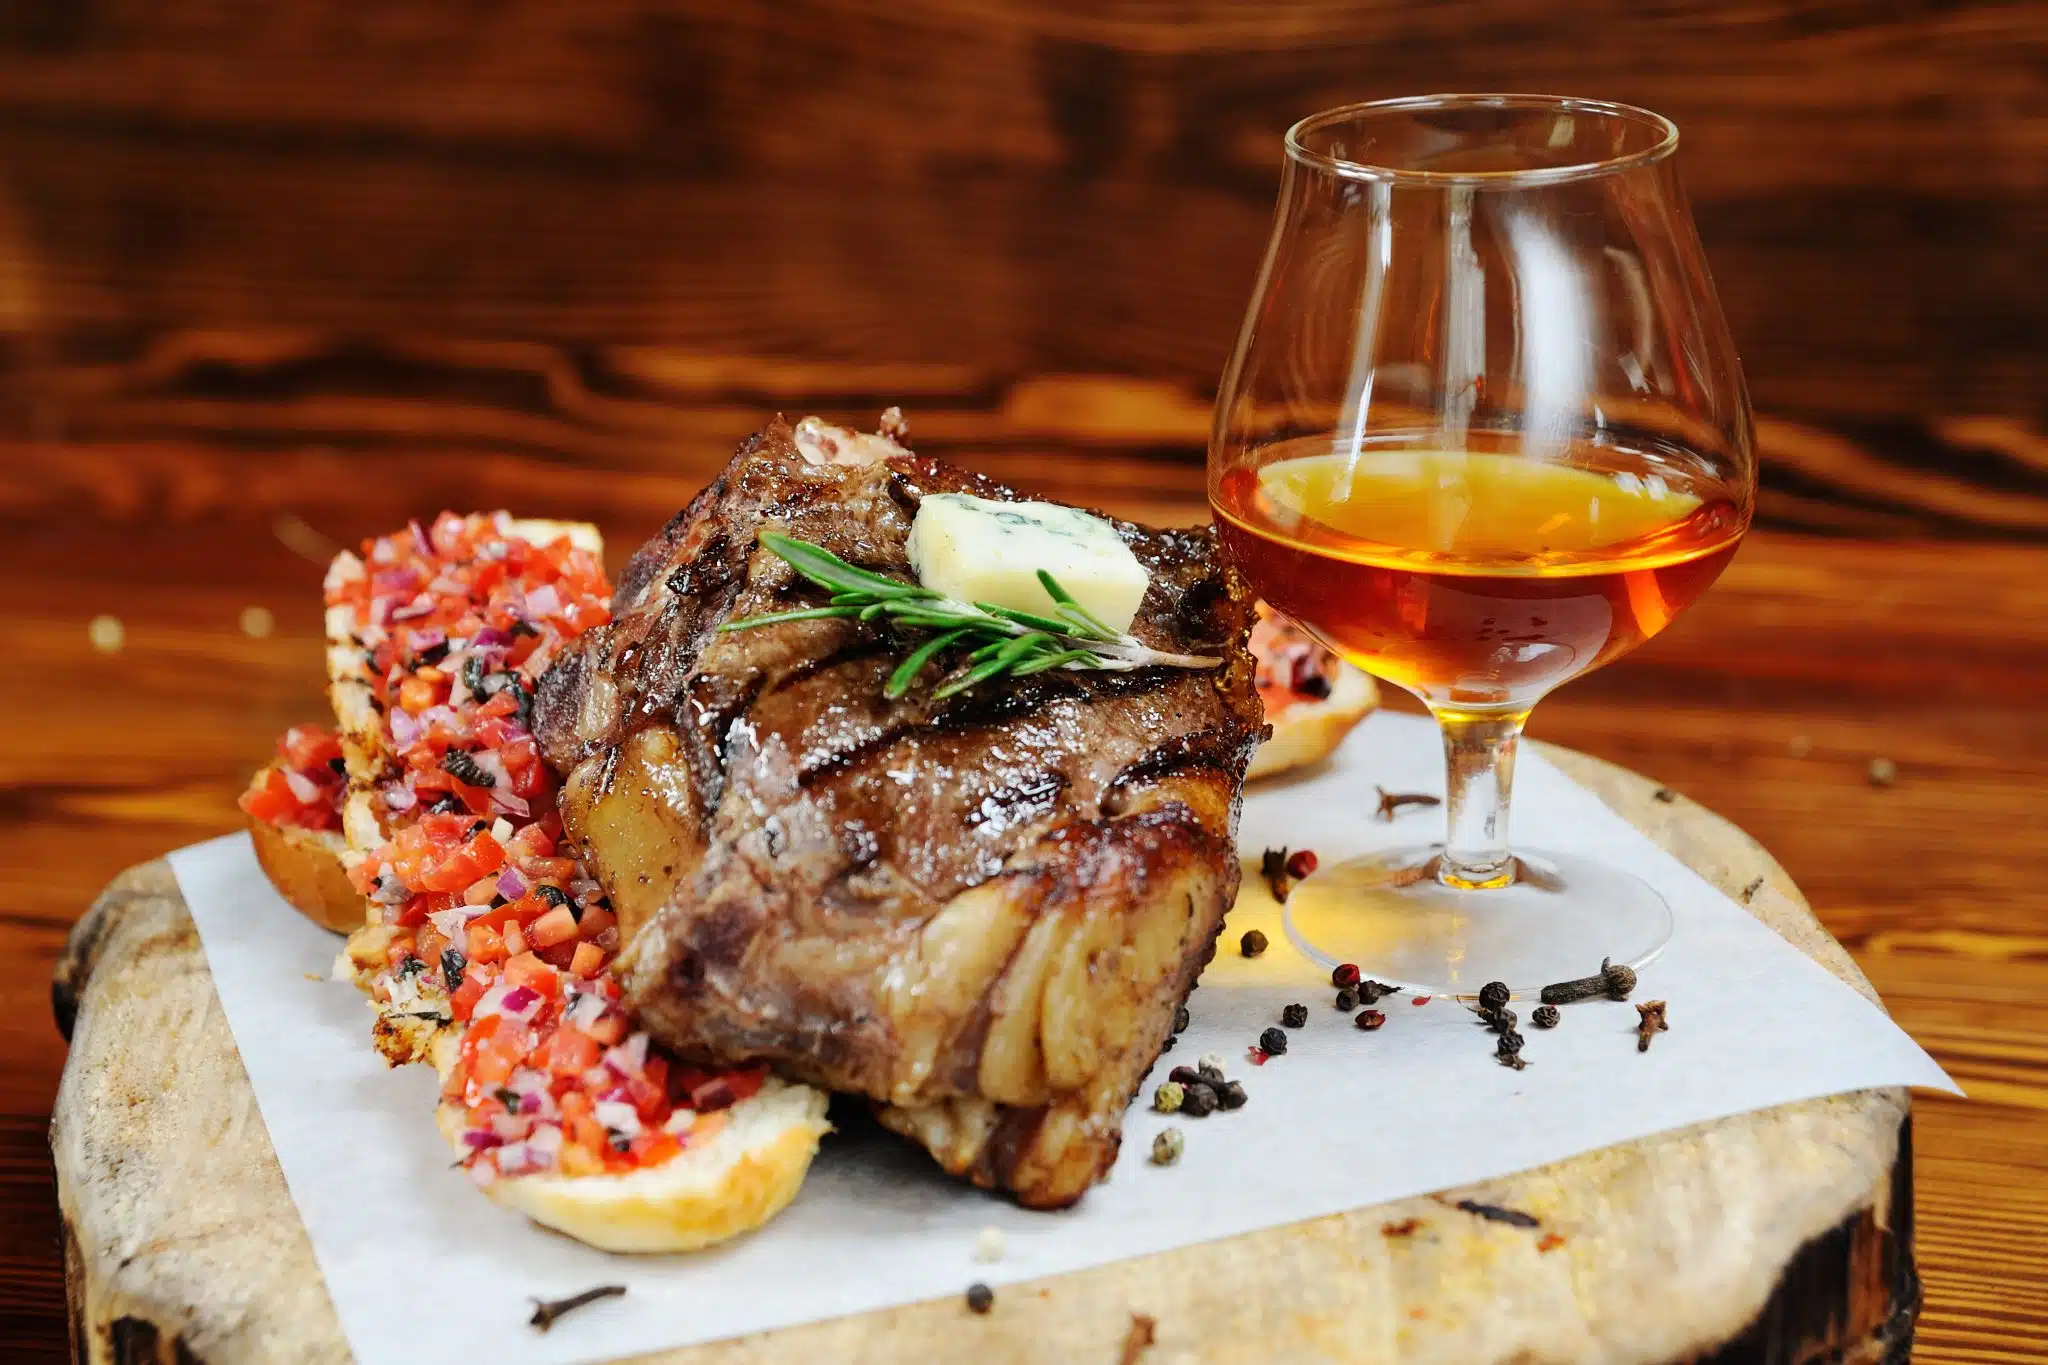 Grilled pork chop on a wooden board with brandy and bruschetta.